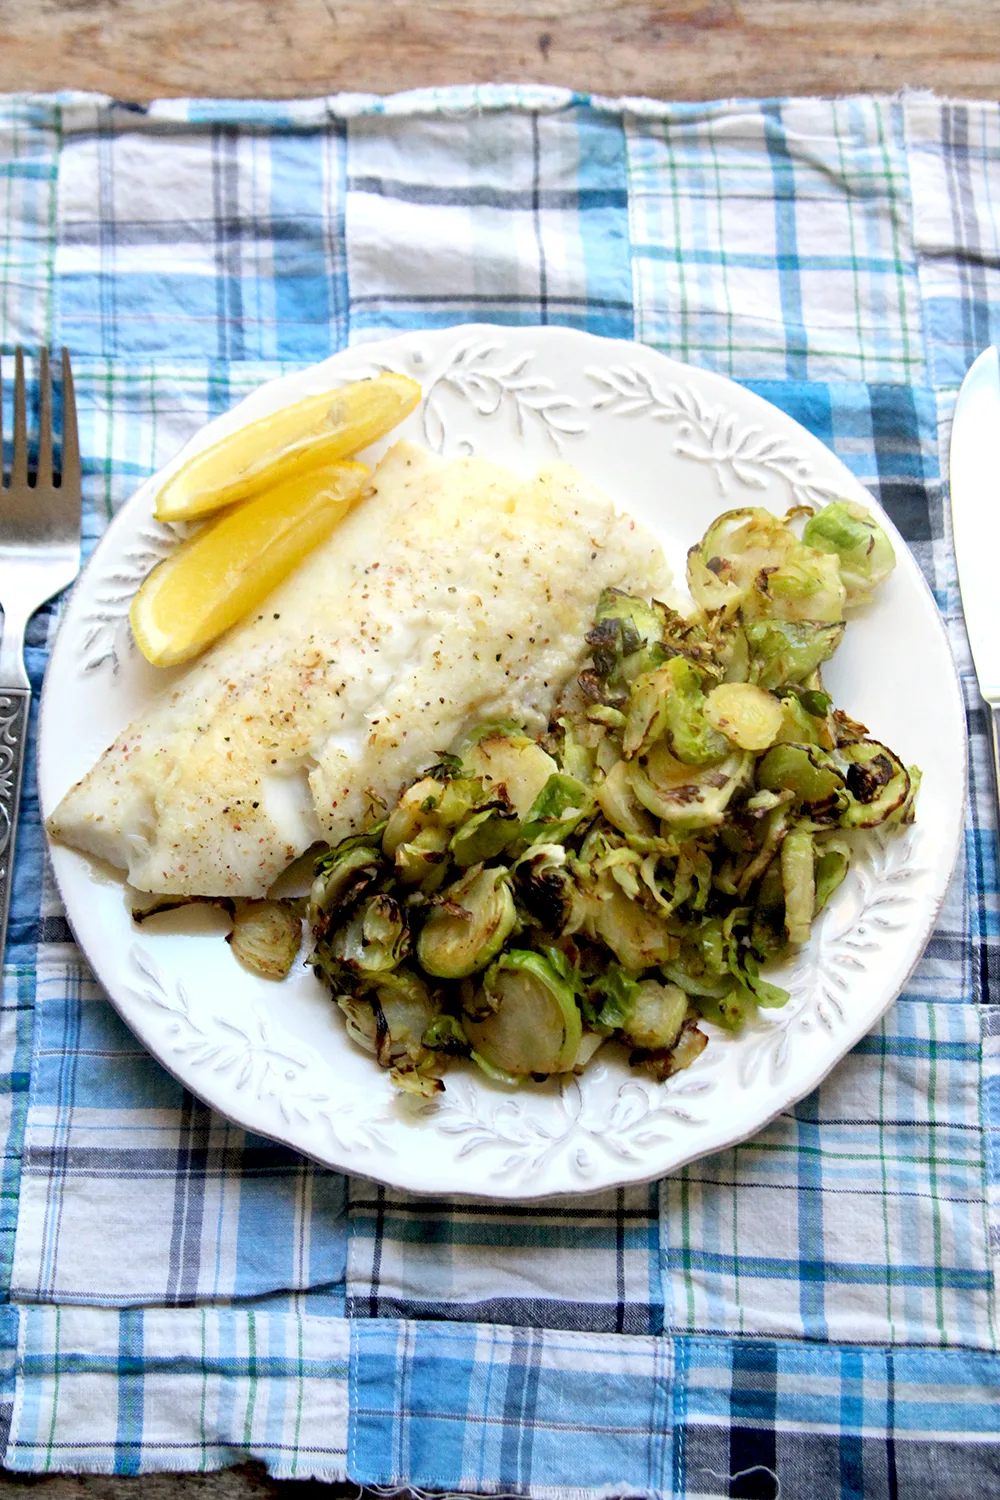 Parmesan Baked Haddock is shown from above on a white plate with a pile of sauteed Brussels sprouts and two lemon wedges. The plate sits on a blue plaid fabric-covered table with a fork and knife on either side.